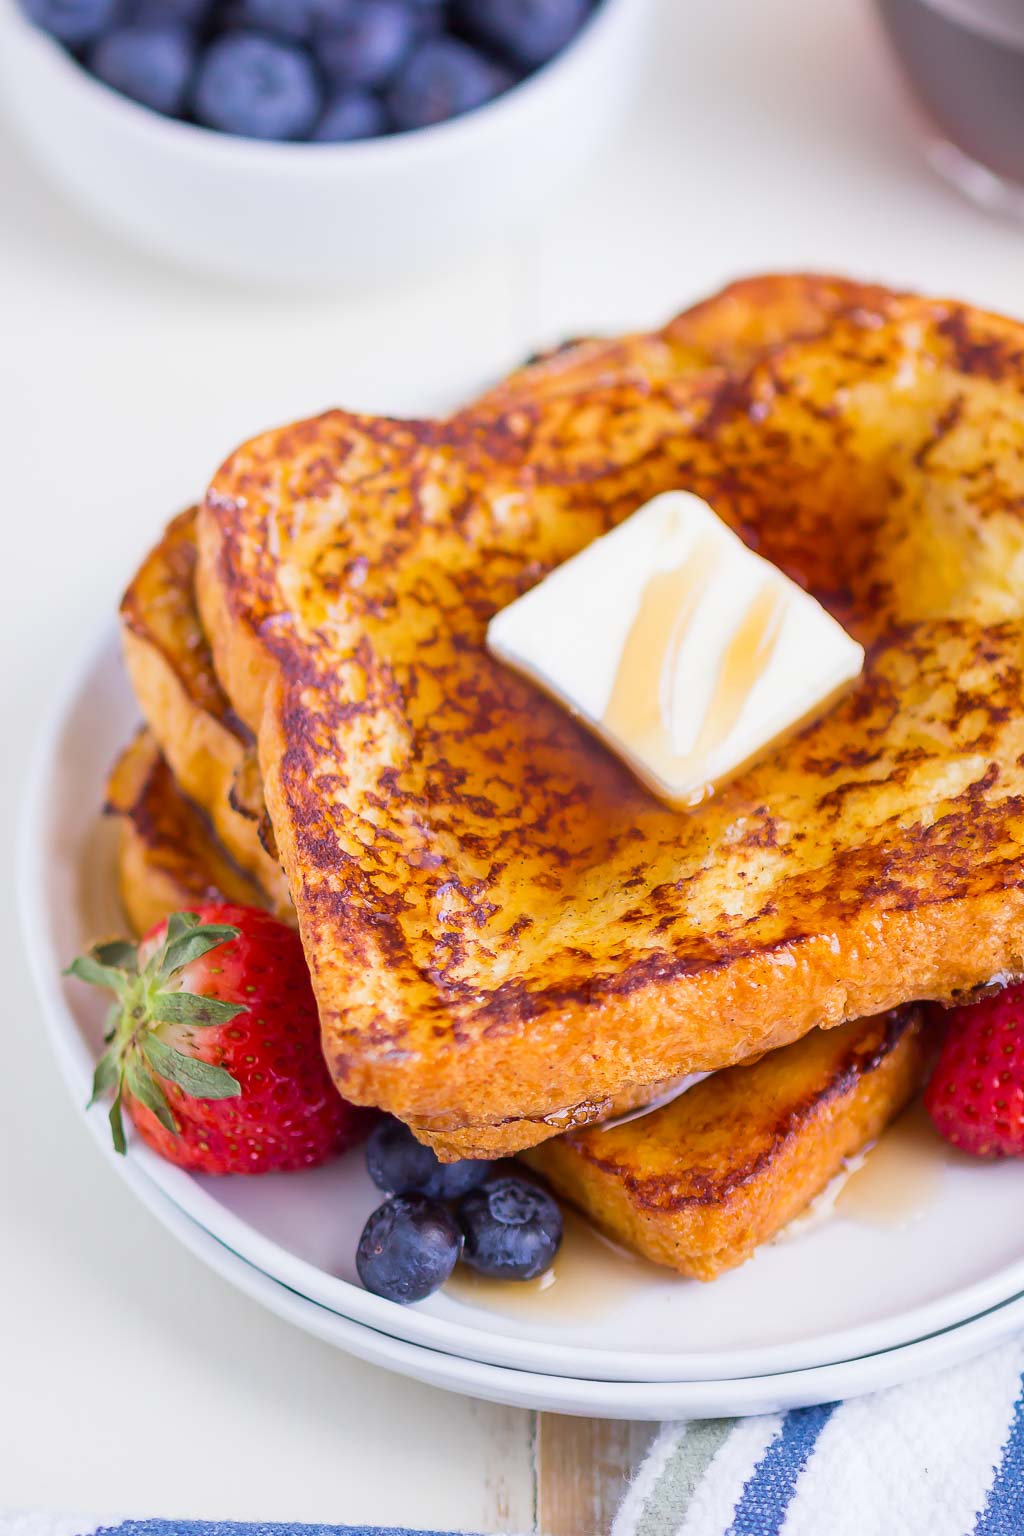 The Best French Toast Recipe (Brioche French Toast) - Dessert for Two